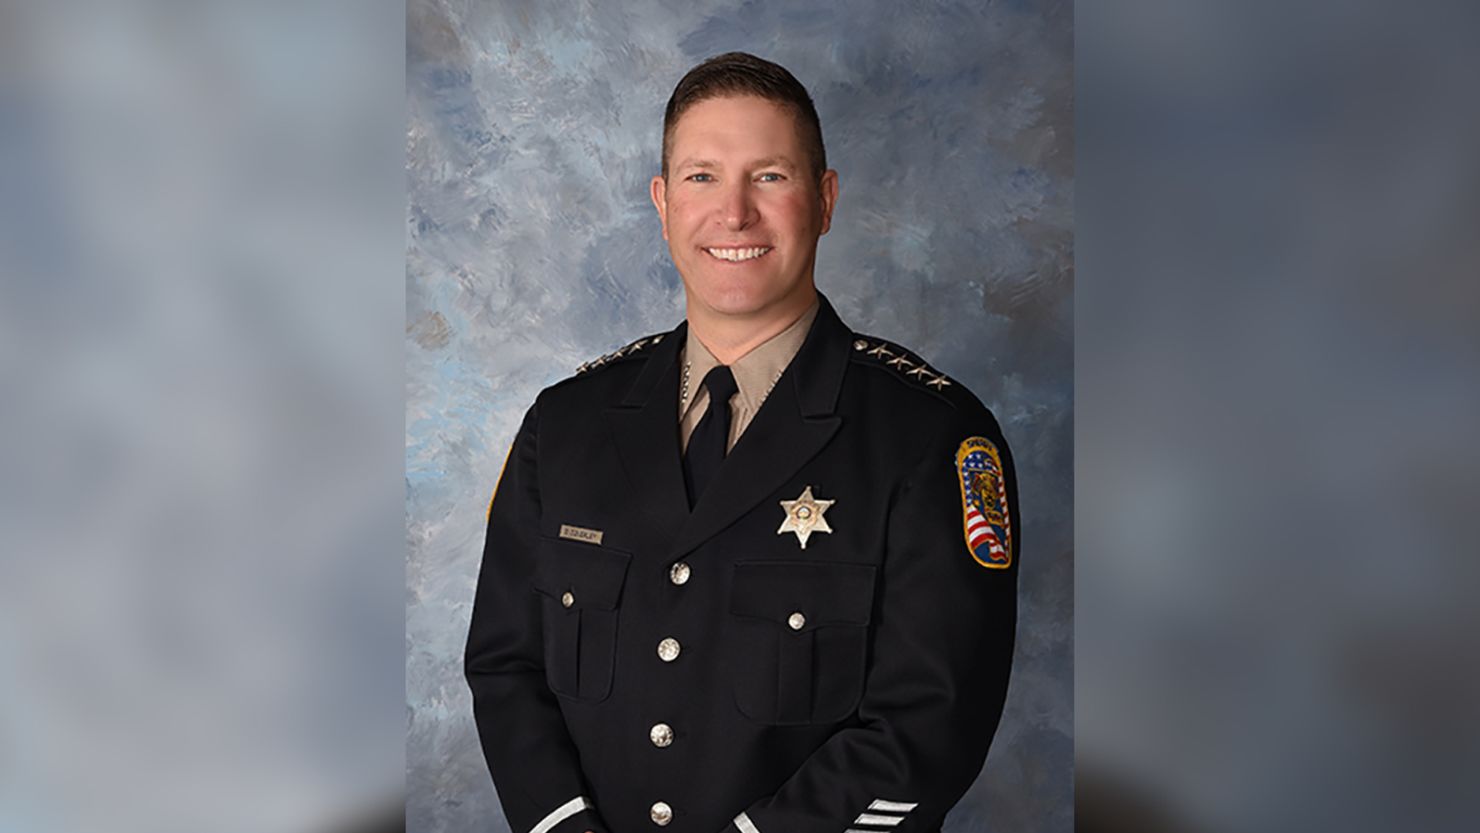 Douglas County Sheriff Dan Coverley issued his message to the library system this week. He and the library system director later had a "candid conversation" about the issue, they said in a statement.